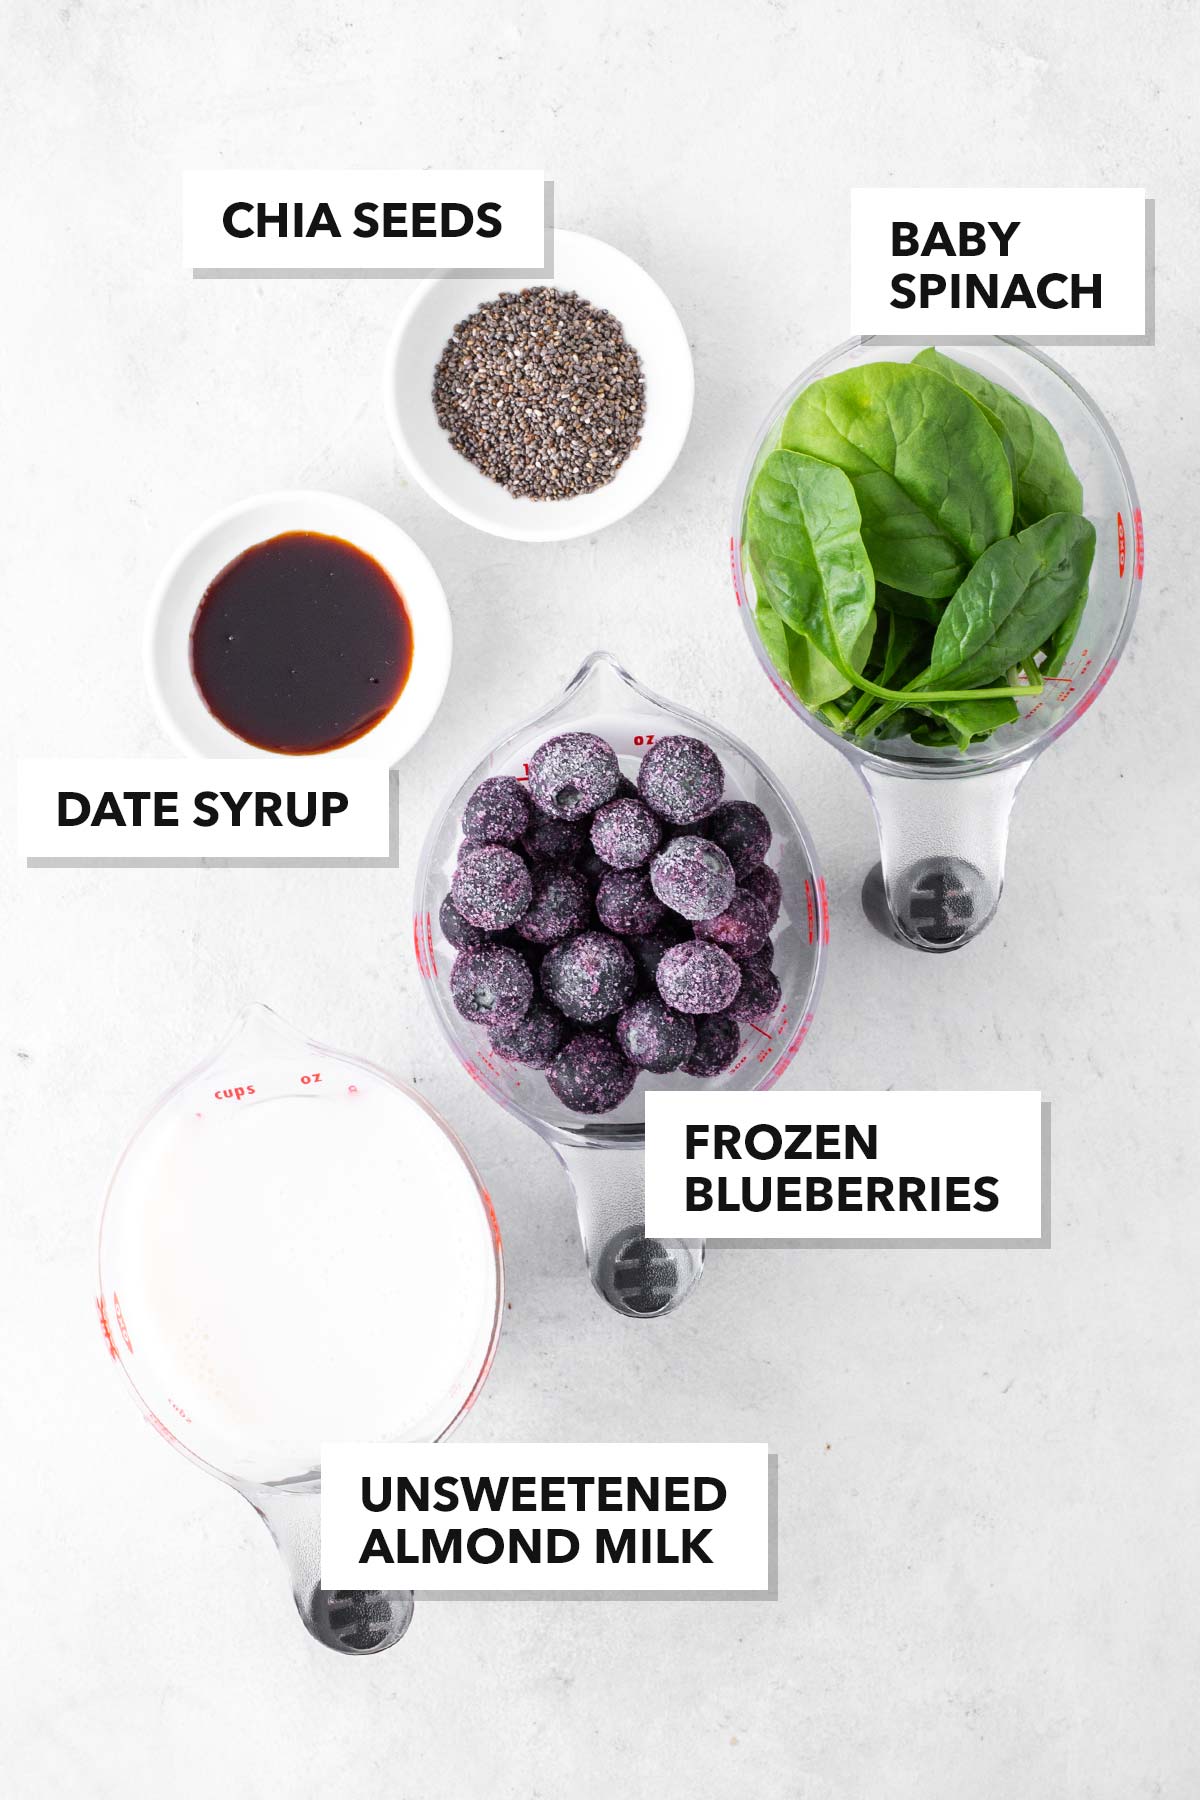 Ingredients for a blueberry smoothie.